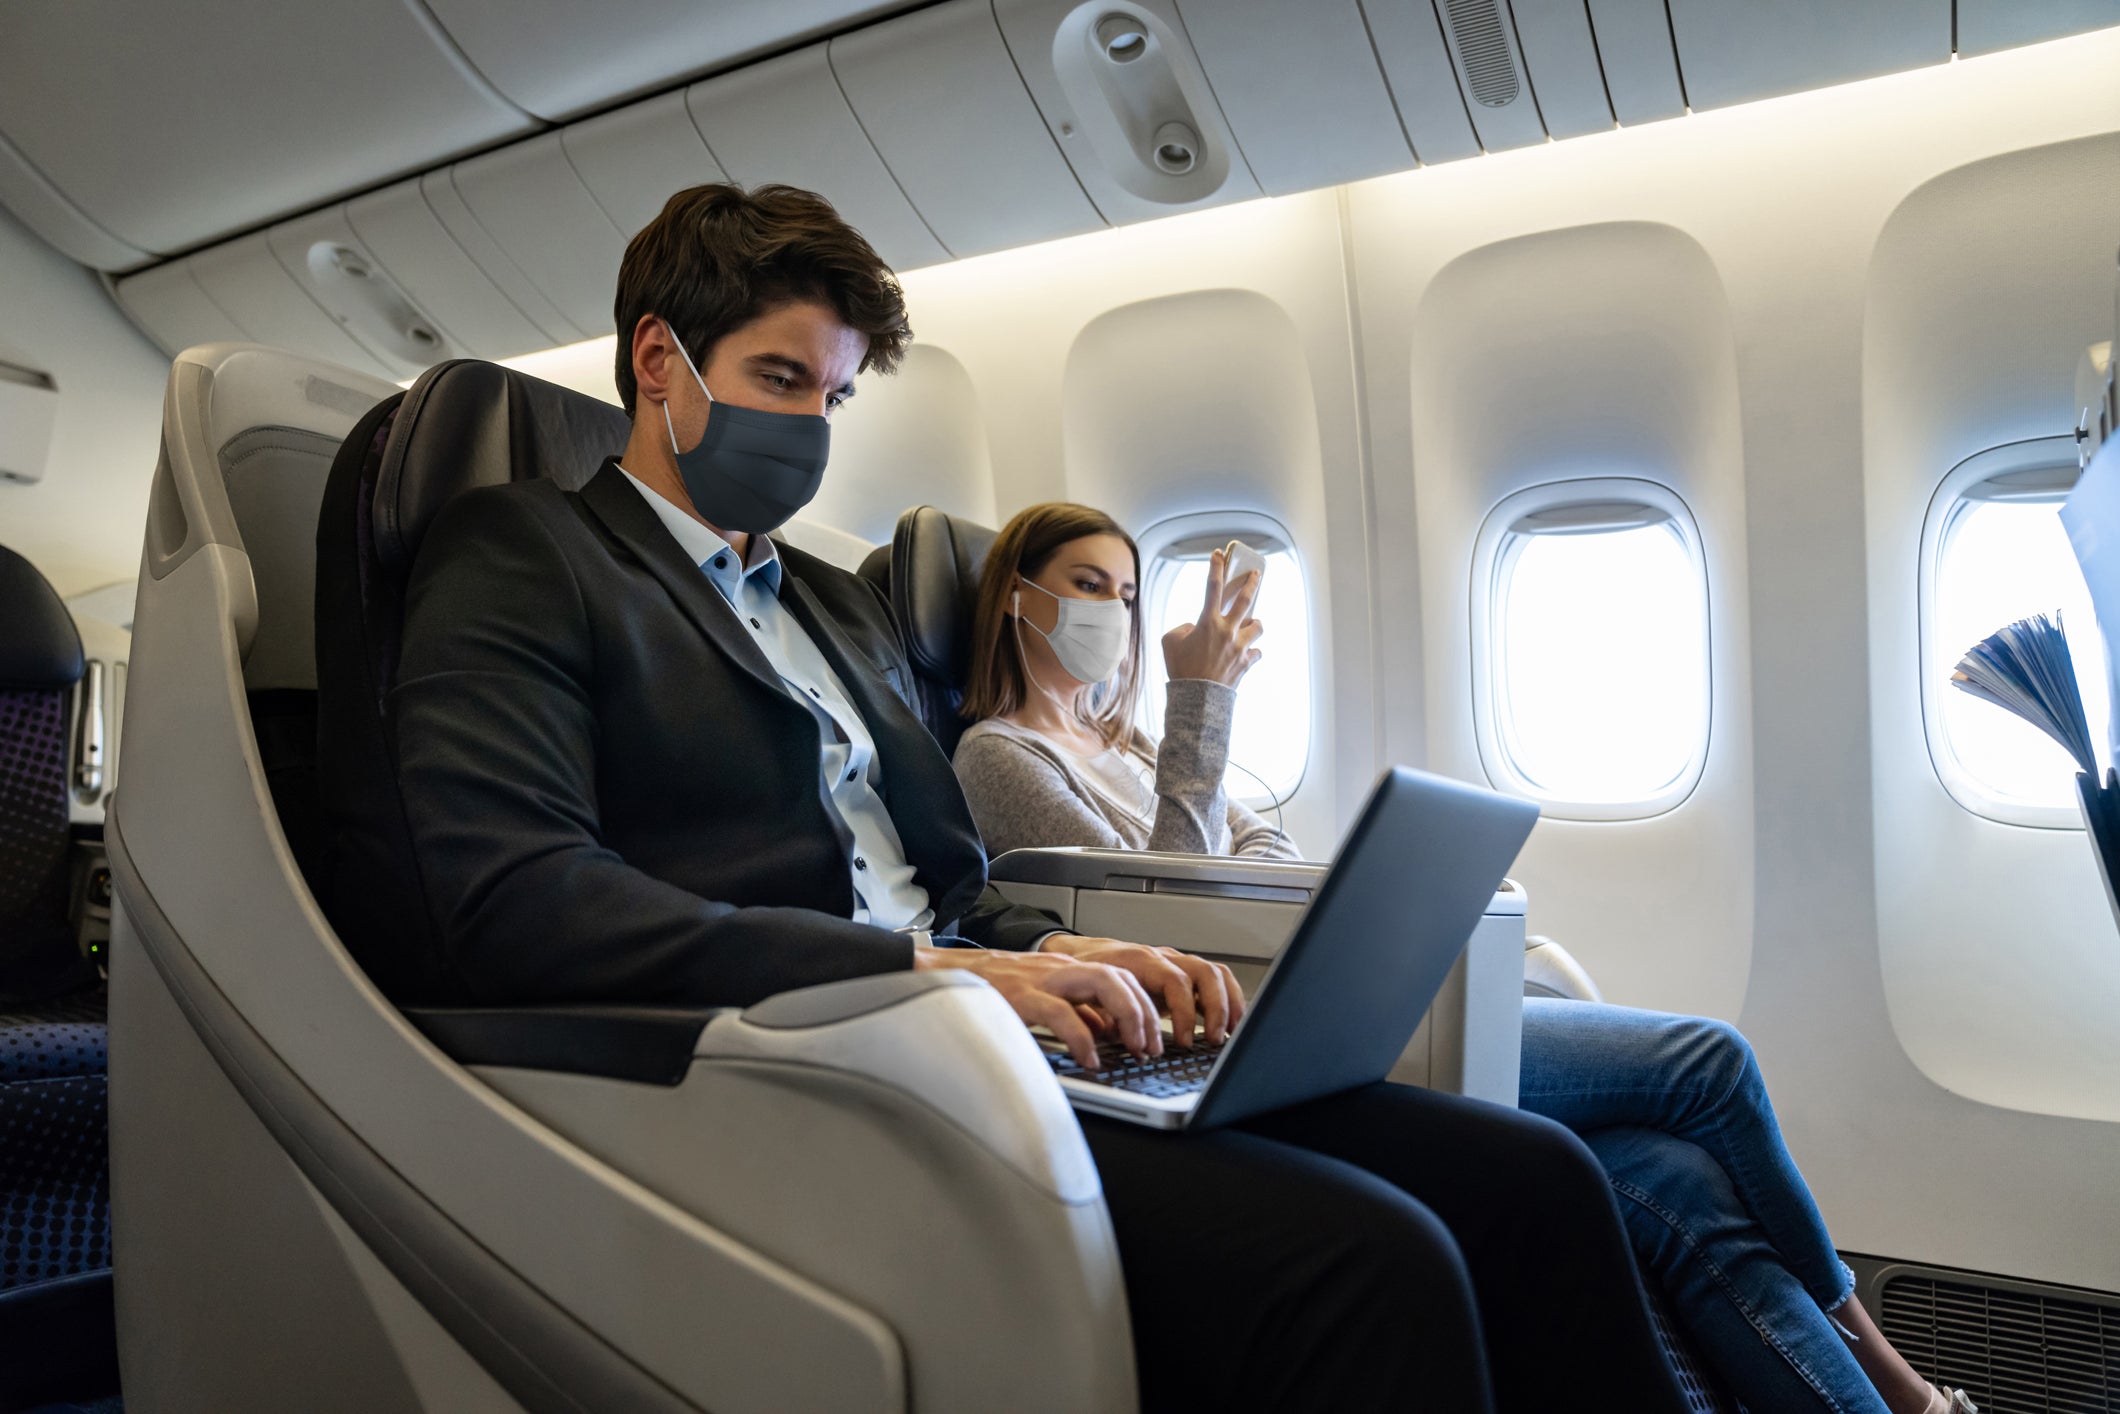 Score free and discounted inflight Wi-Fi with these credit cards